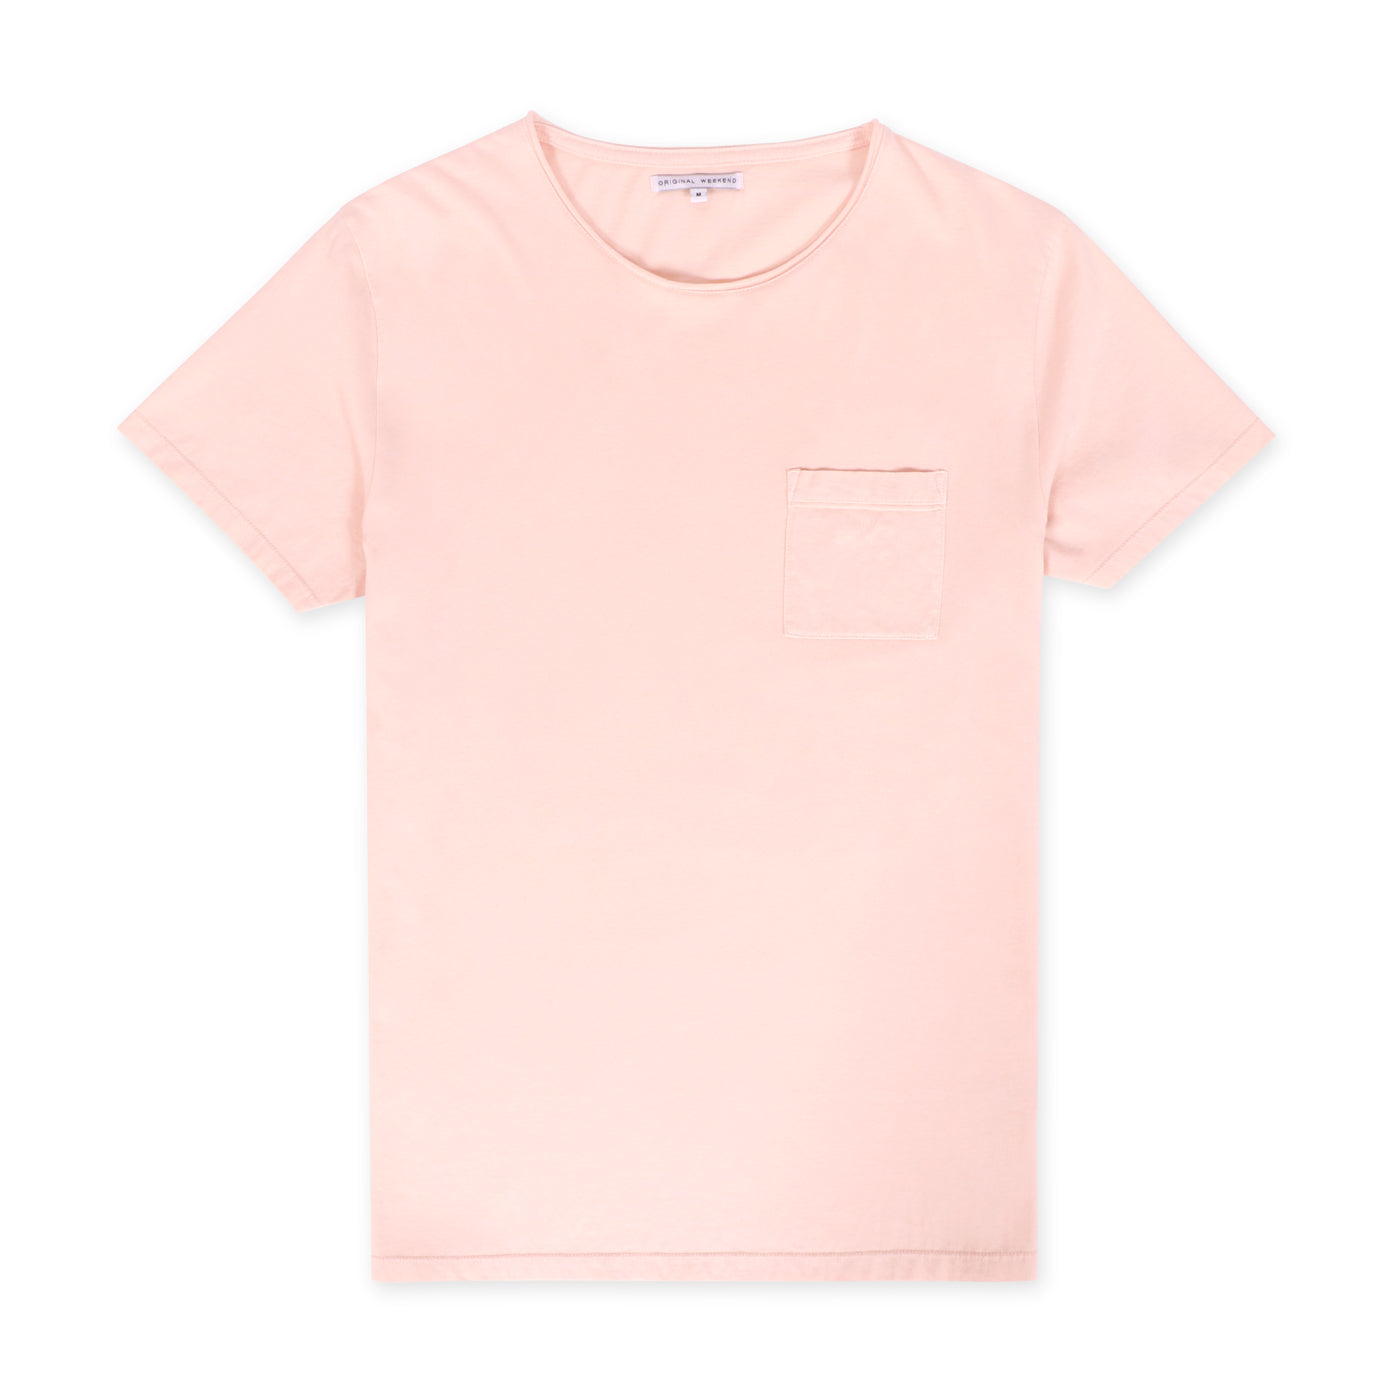 OWTS1804 Washed Coral pink garment dyed beach fit men's organic cotton t-shirt with chest pocket detail